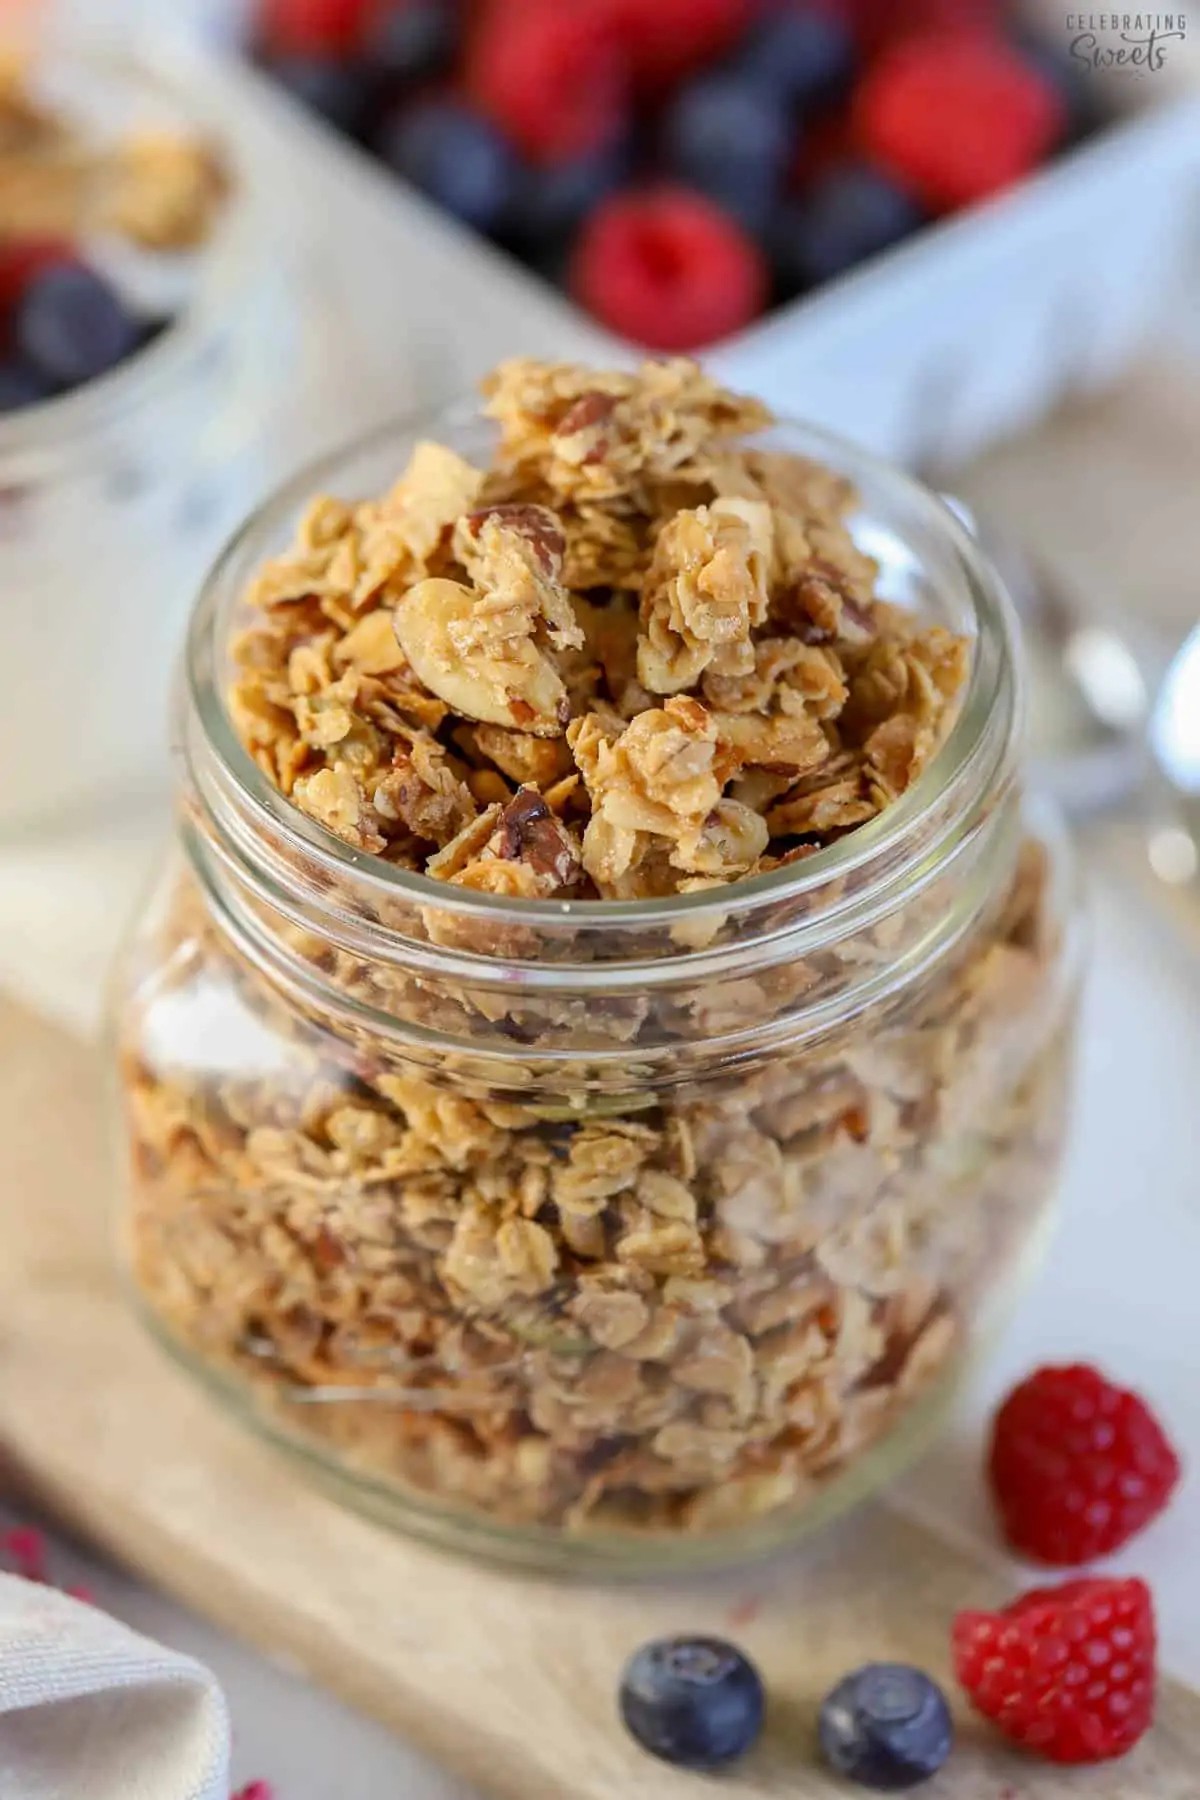 Granola in a glass jar on a wooden board.